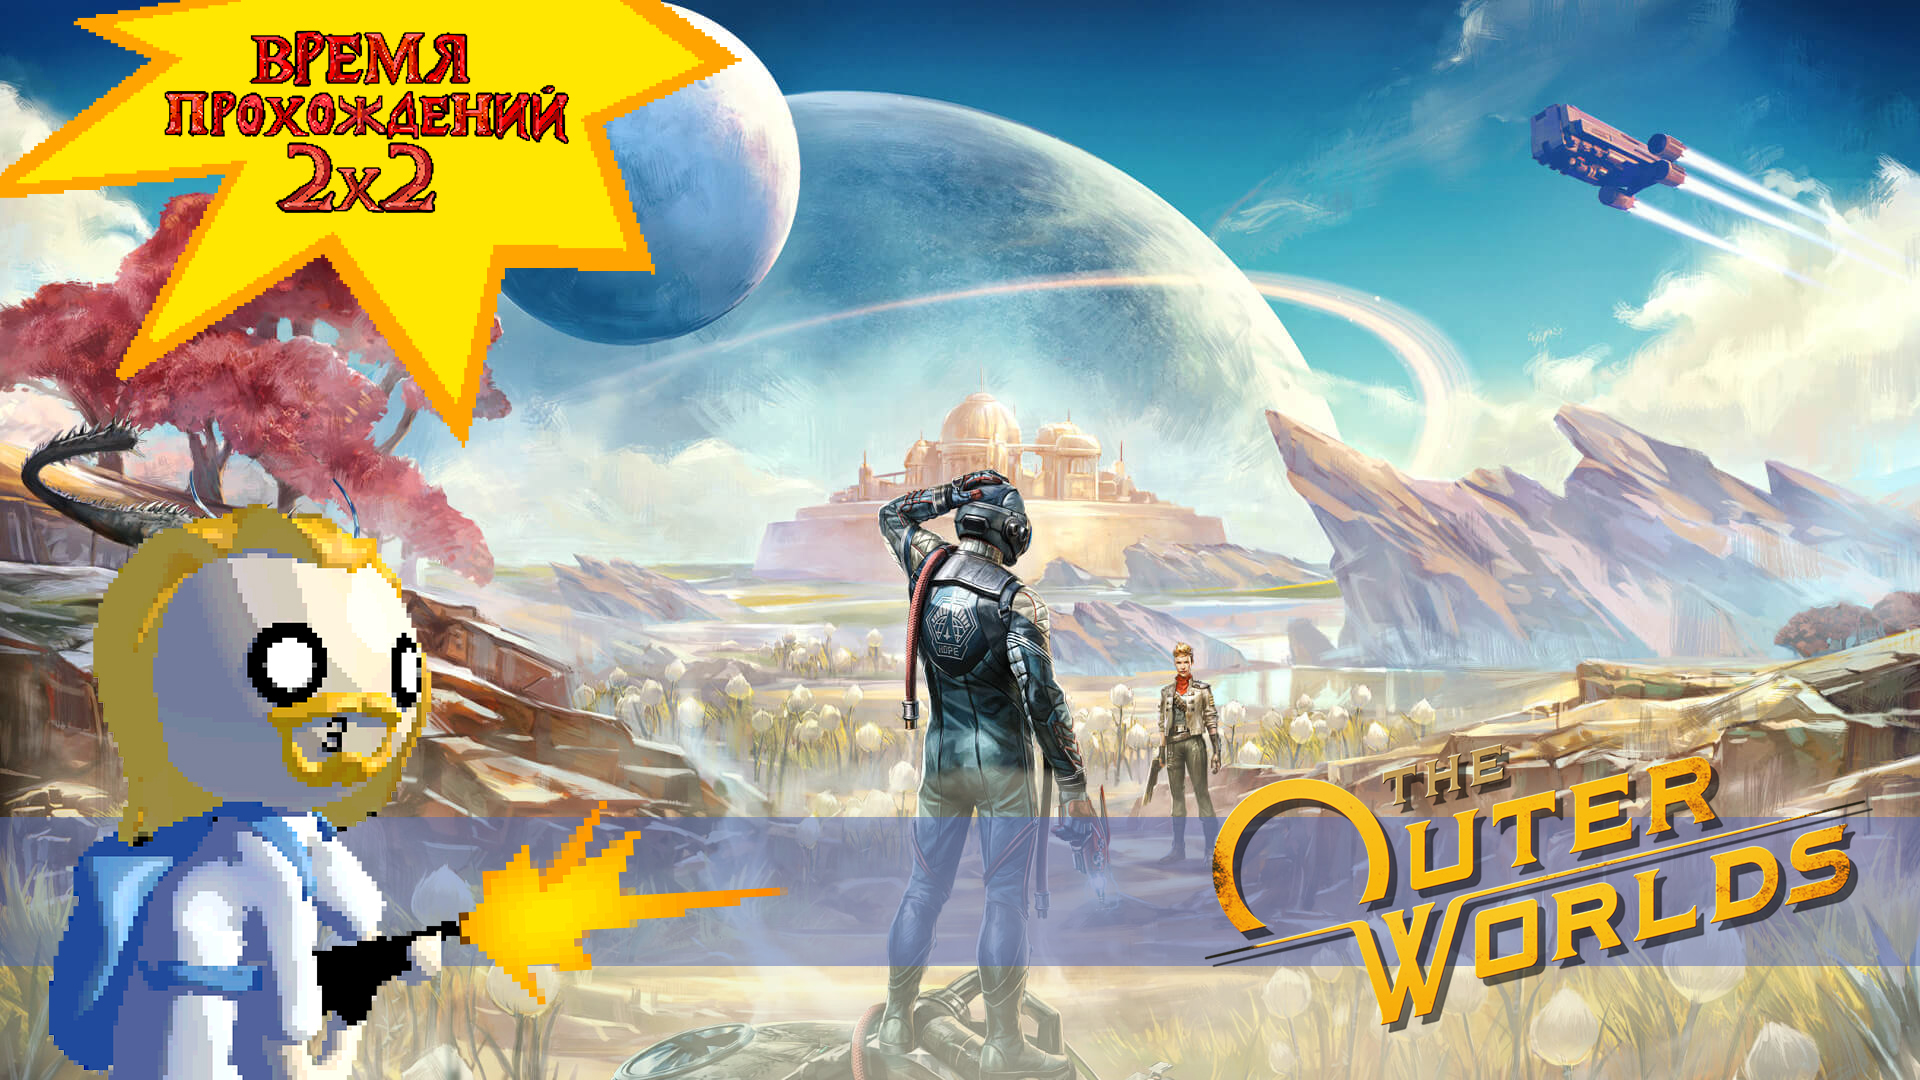 11 серия. Обзор "The Outer Worlds"